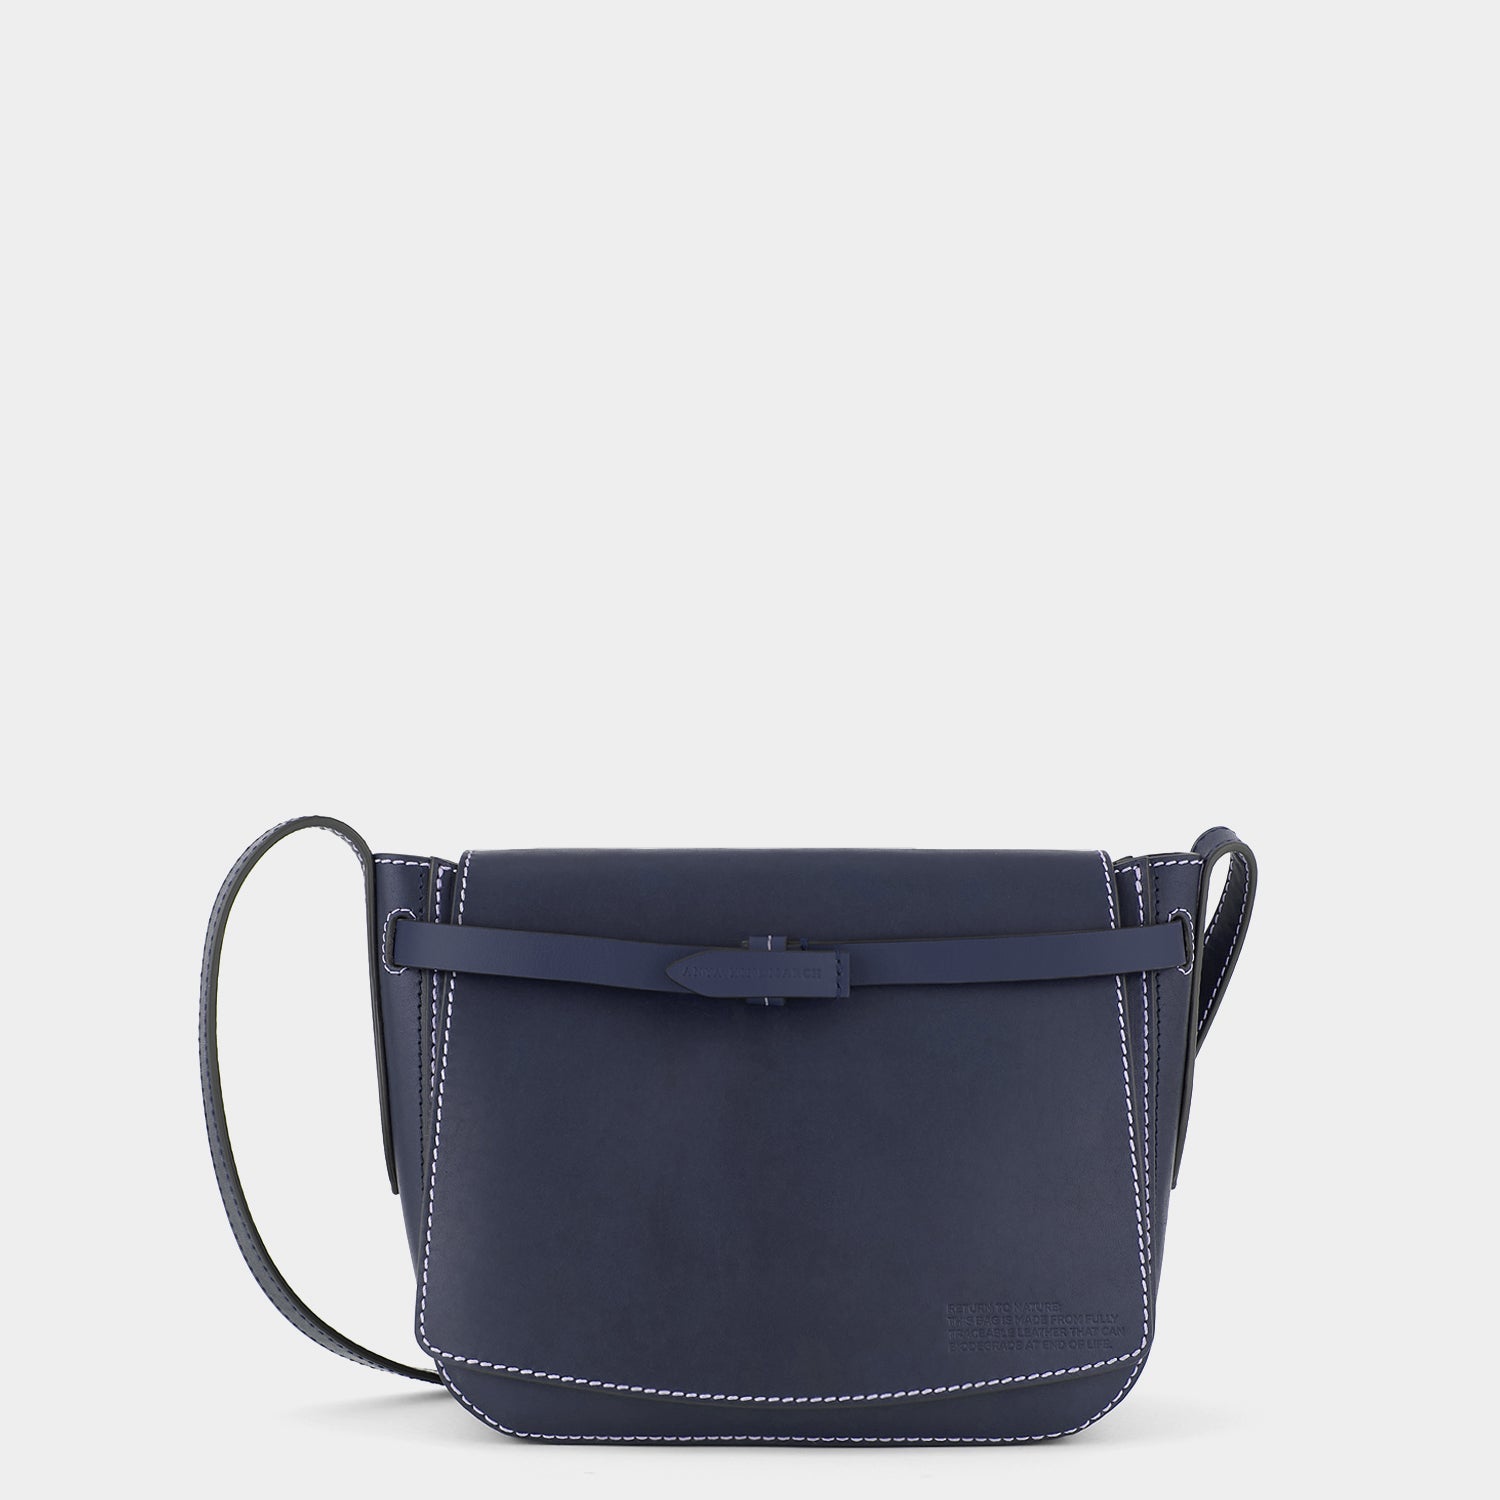 Return to Nature Cross-body -

                  
                    Compostable Leather in Marine -
                  

                  Anya Hindmarch EU
